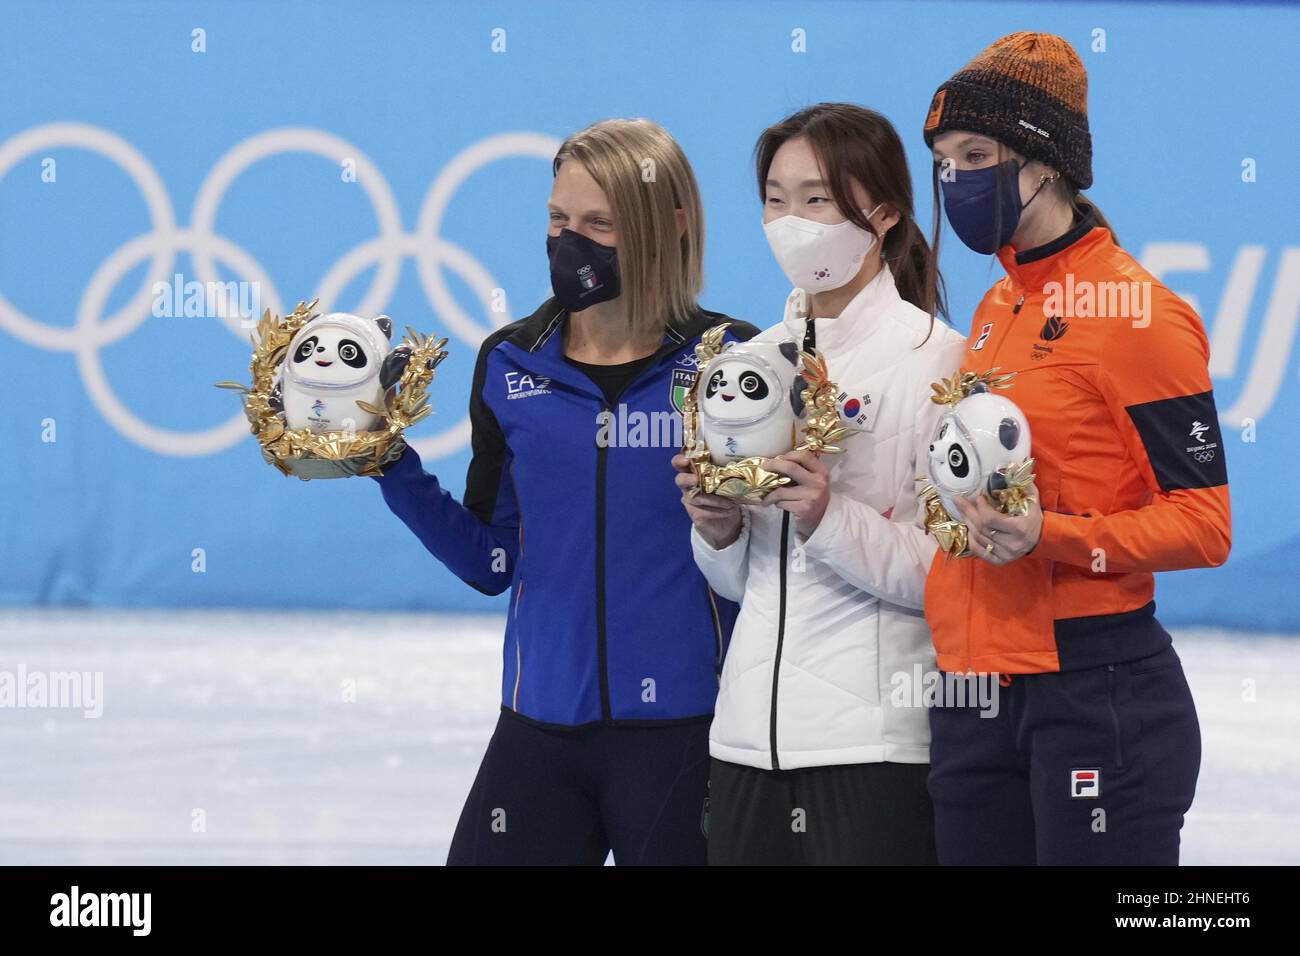 Beijing, China. 16th Feb, 2022. Arianna Fontana of Italy, left, Minjeong Choi of South Korea, center, and Suzanne Schulting of Netherlands, pose with their Bing Dwen Dwen mascots during the venue ceremony for the Women's 1500m Short Track Speed Skating in the Capital Indoor Stadium at the Beijing 2022 Winter Olympic on Wednesday, February 16, 2022. Minjeong Choi of South Korea, won the gold medal, Arianna Fontana of Italy, the silver medal and Suzanne Schulting of Netherlands, the bronze medal. Photo by Richard Ellis/UPI Credit: UPI/Alamy Live News Stock Photo